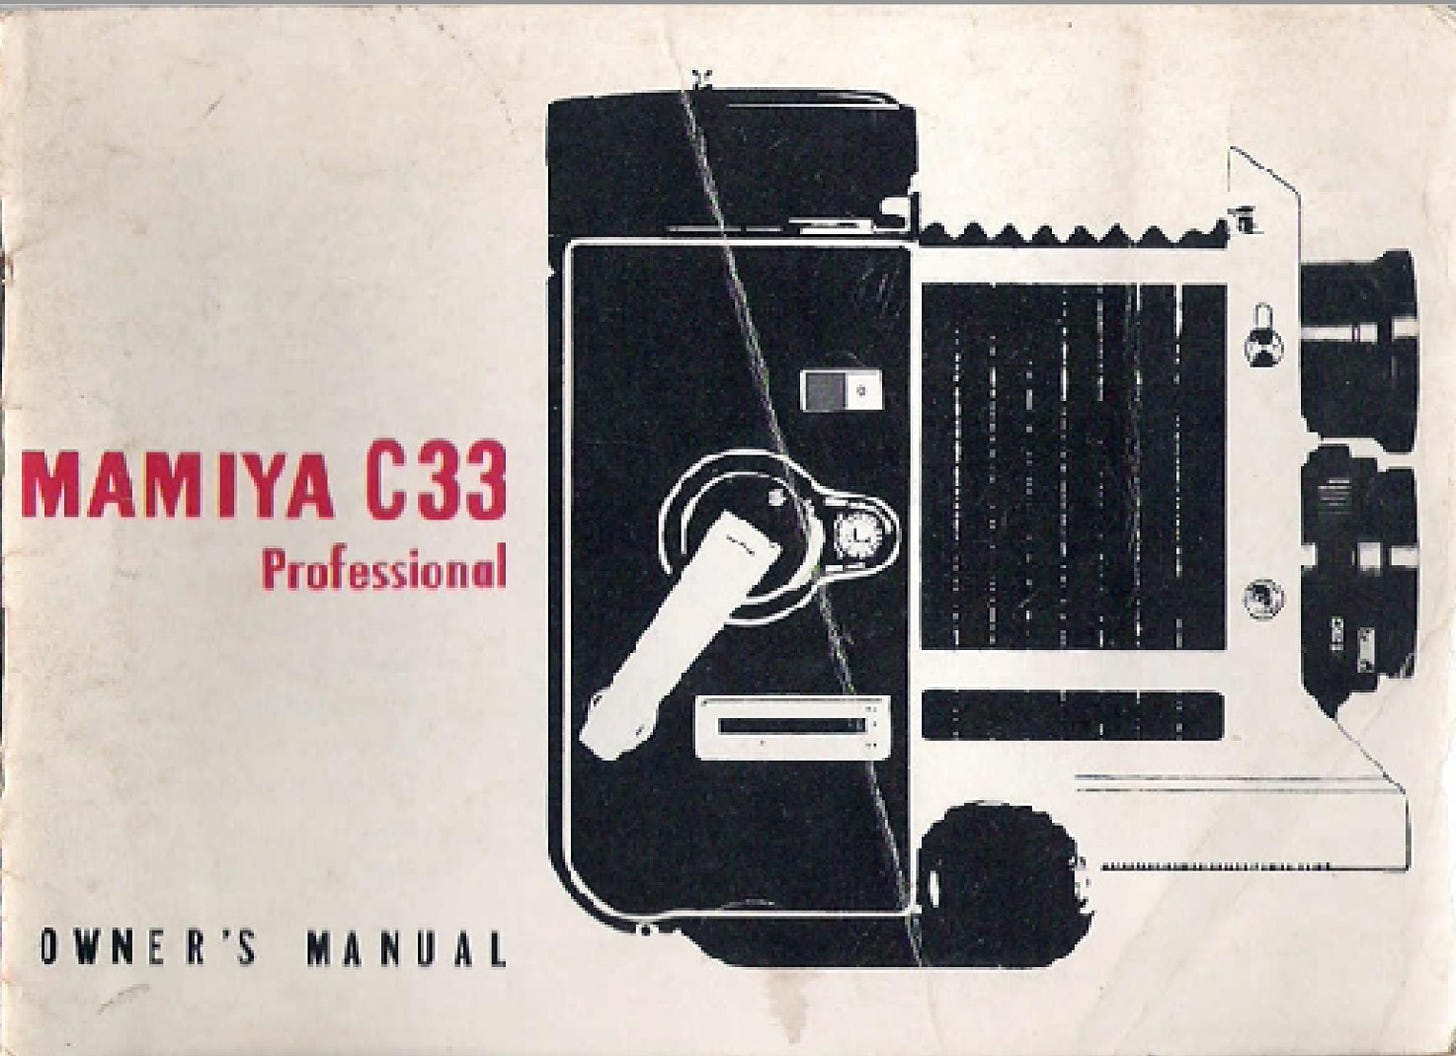 Owner's manual cover